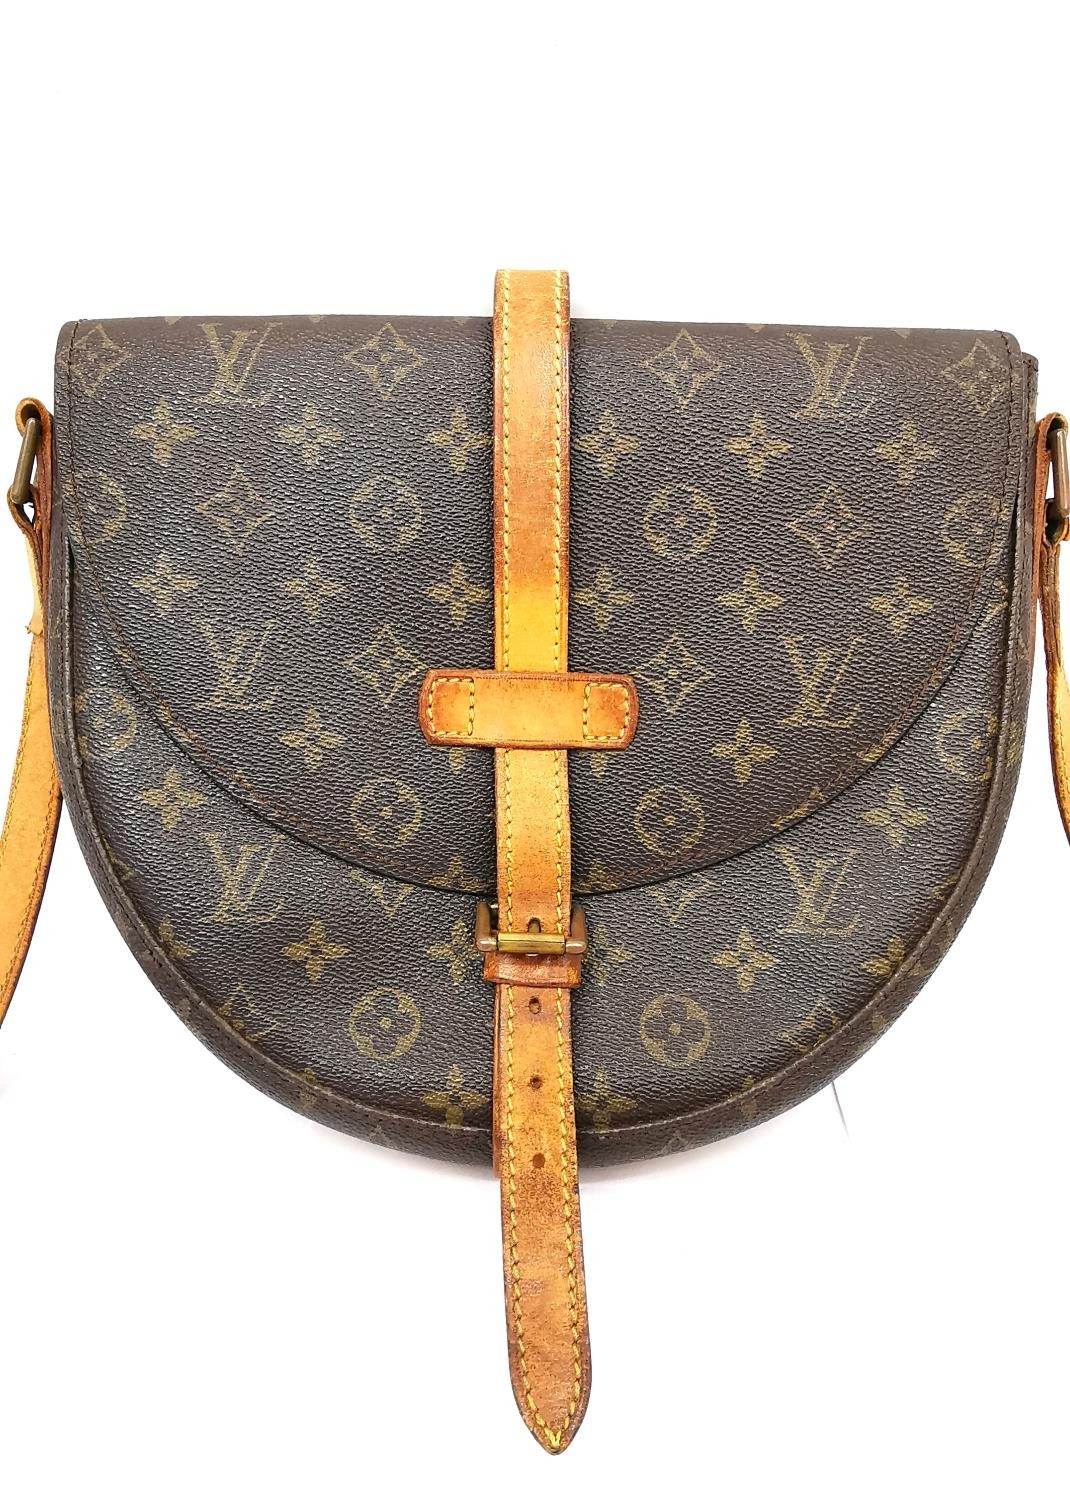 A Louis Vuitton Chantilly monogram shoulder bag, with tan leather adjustable strap. W.6.5 L.27 H. - Image 2 of 7